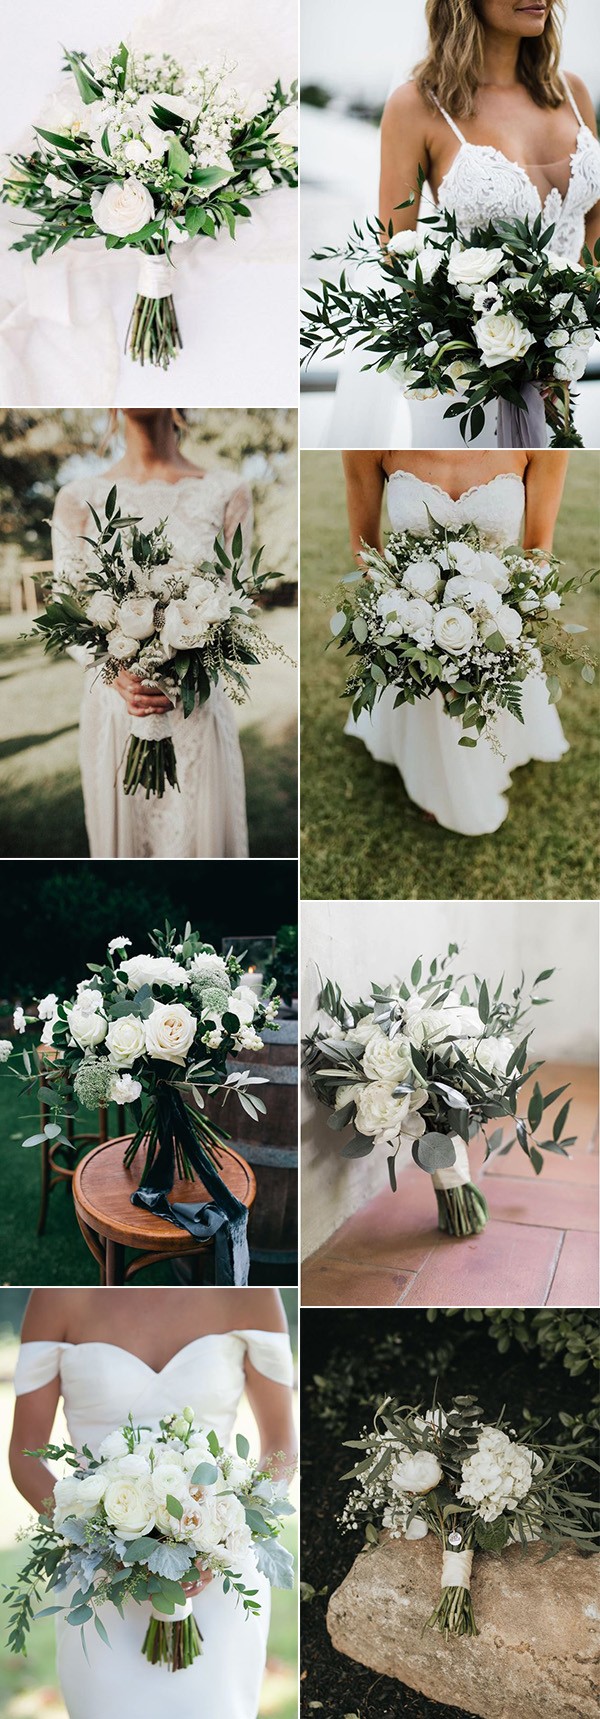 white and greenery wedding bouquets